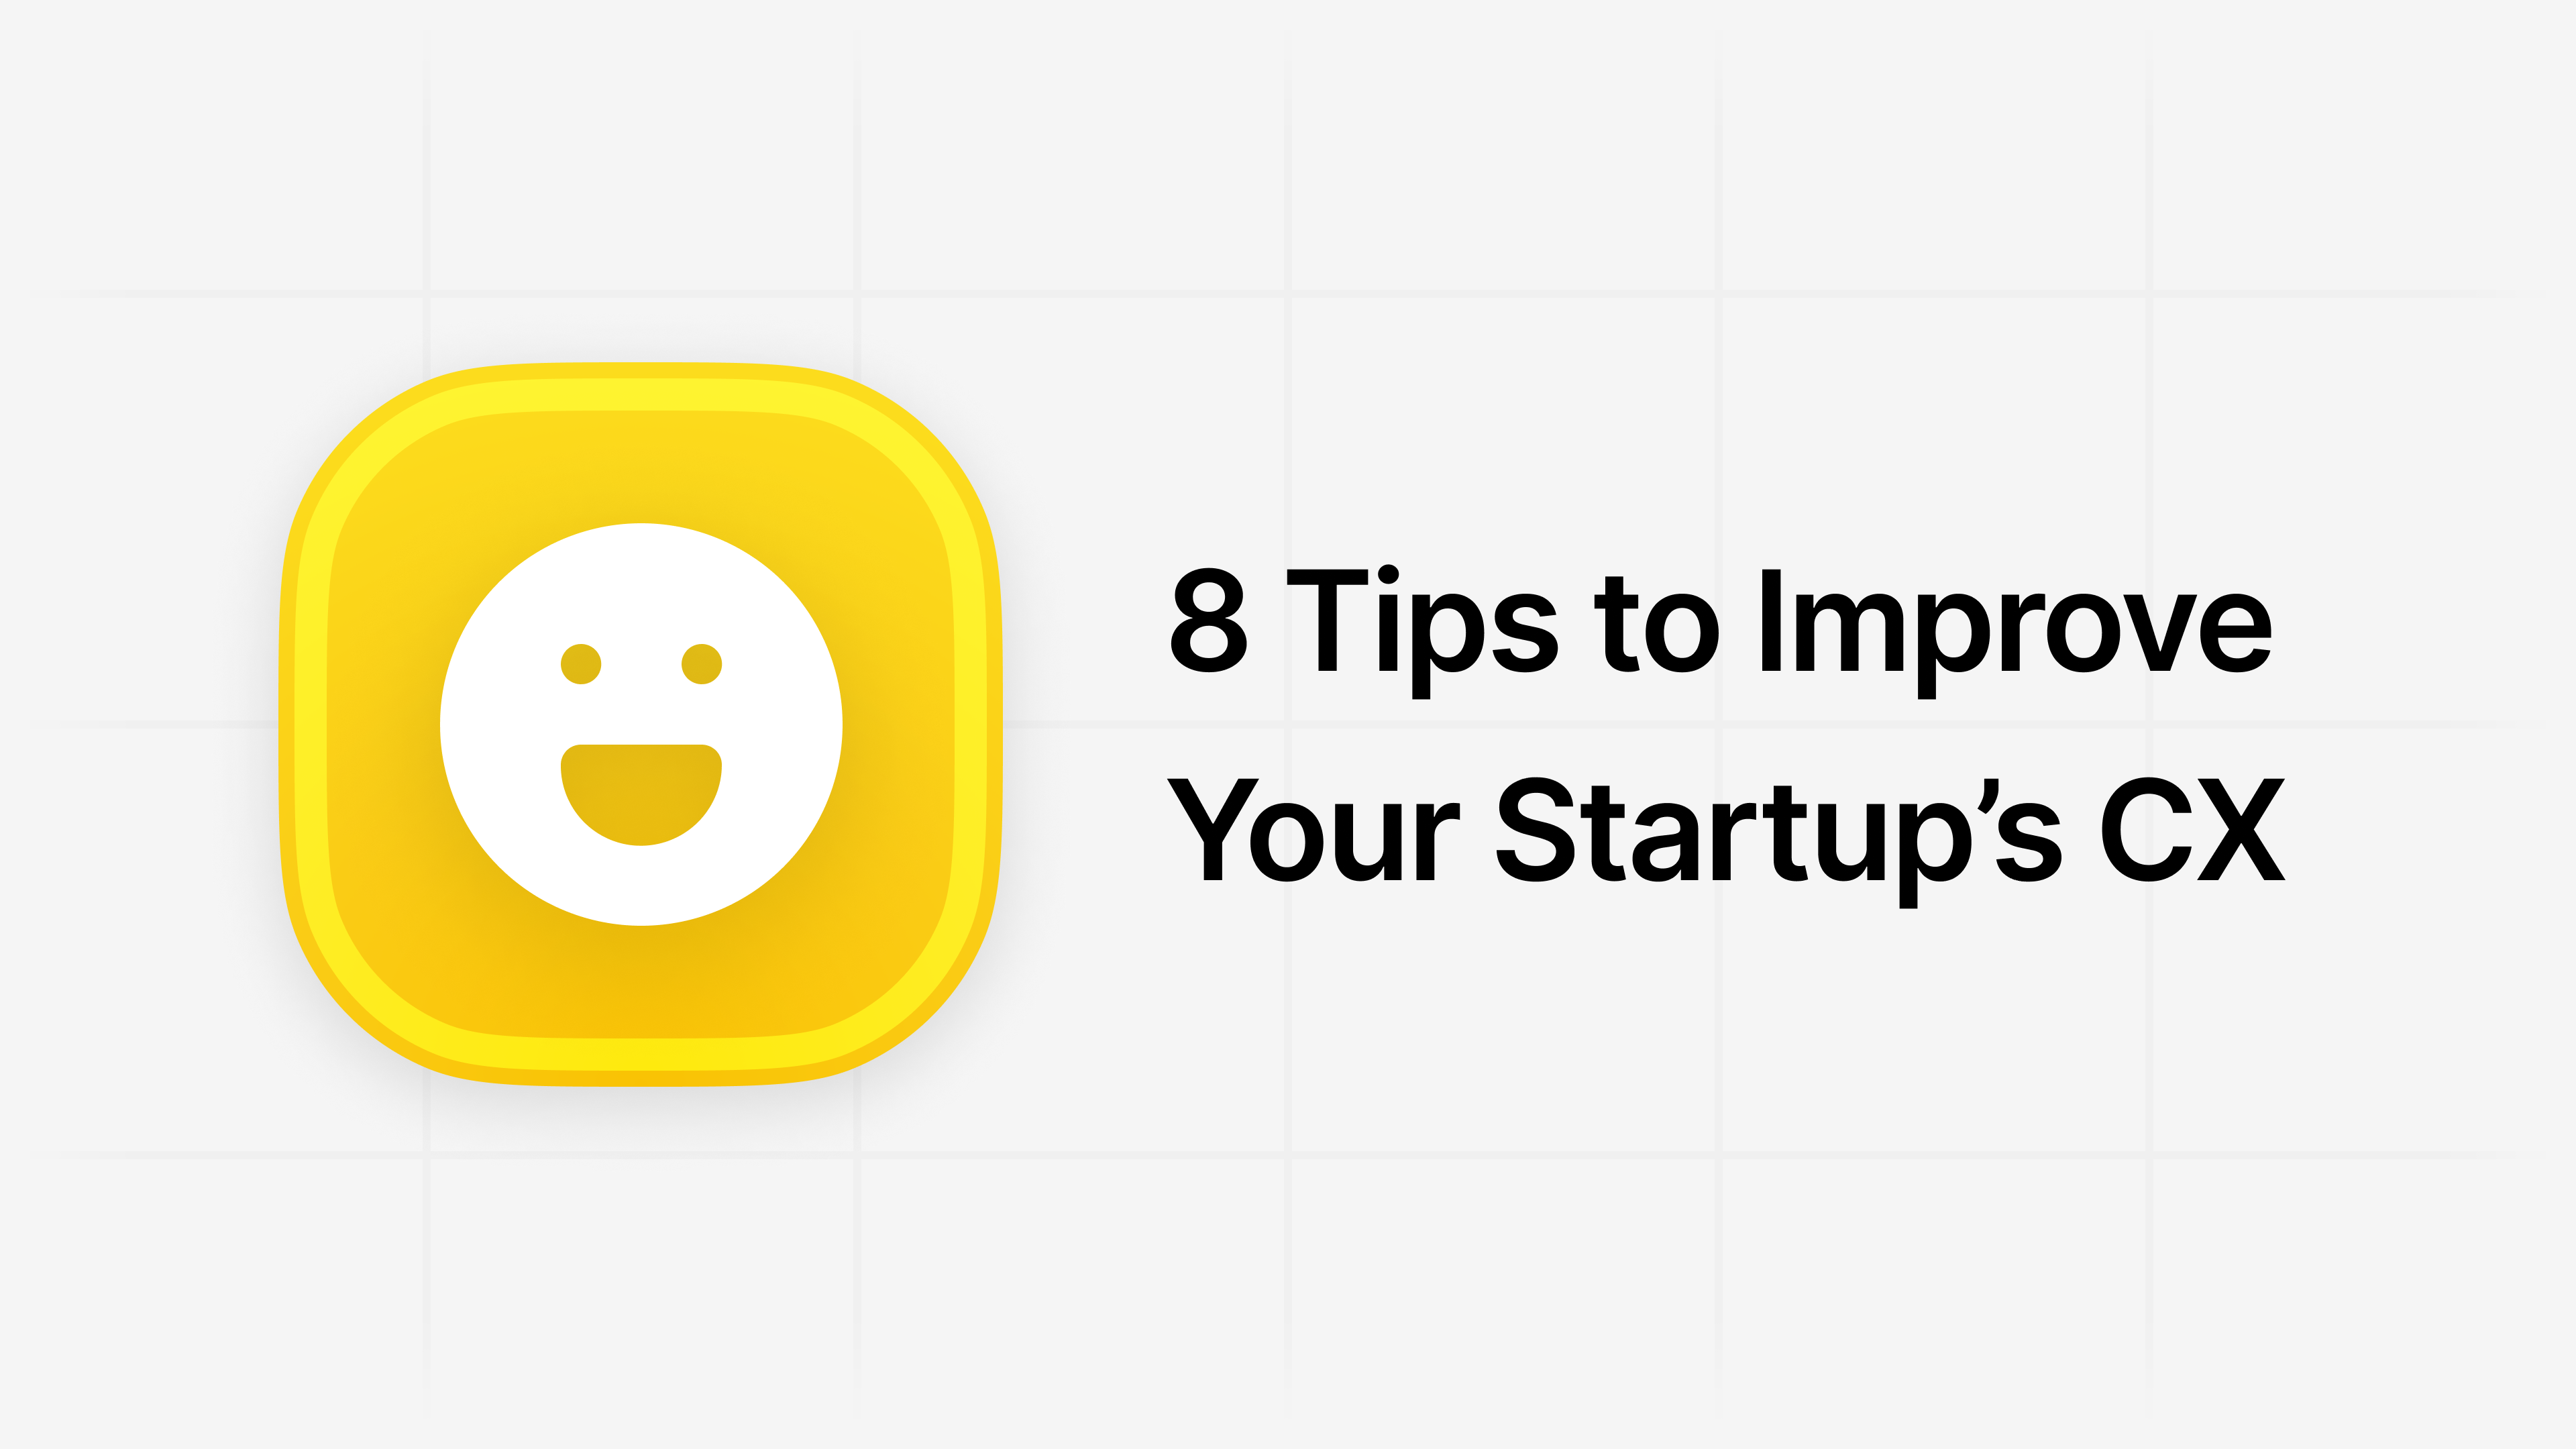 8 Tips to Improve Your Startup’s Customer Experience article visual